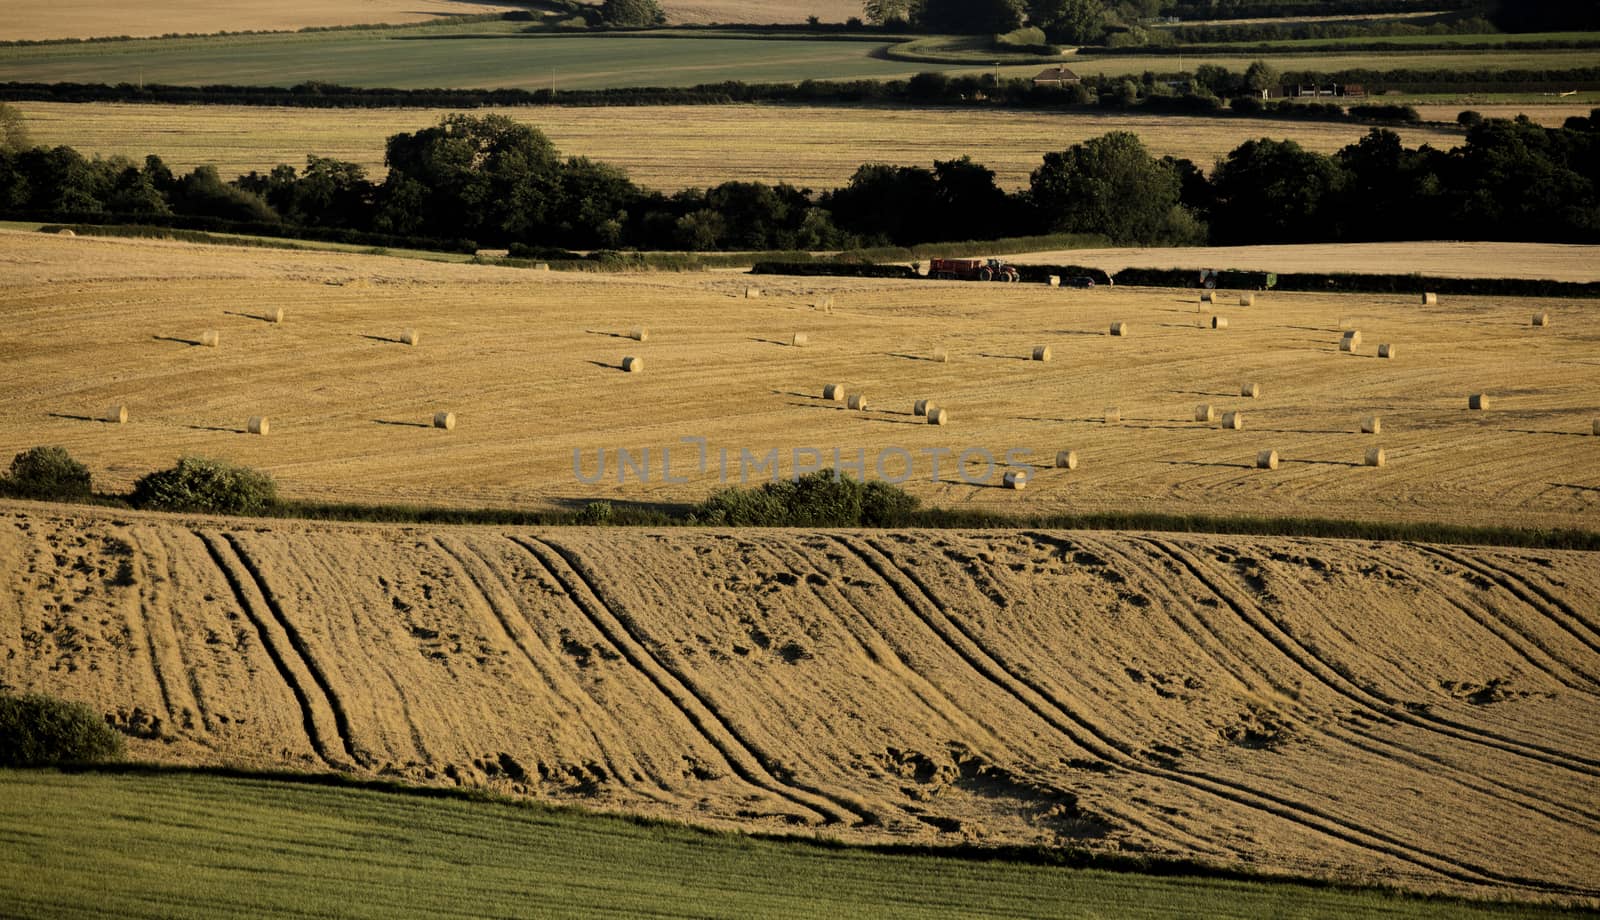 Near Belchford, Lincolnshire, UK, July 2017, View of hay bales s by ElectricEggPhoto